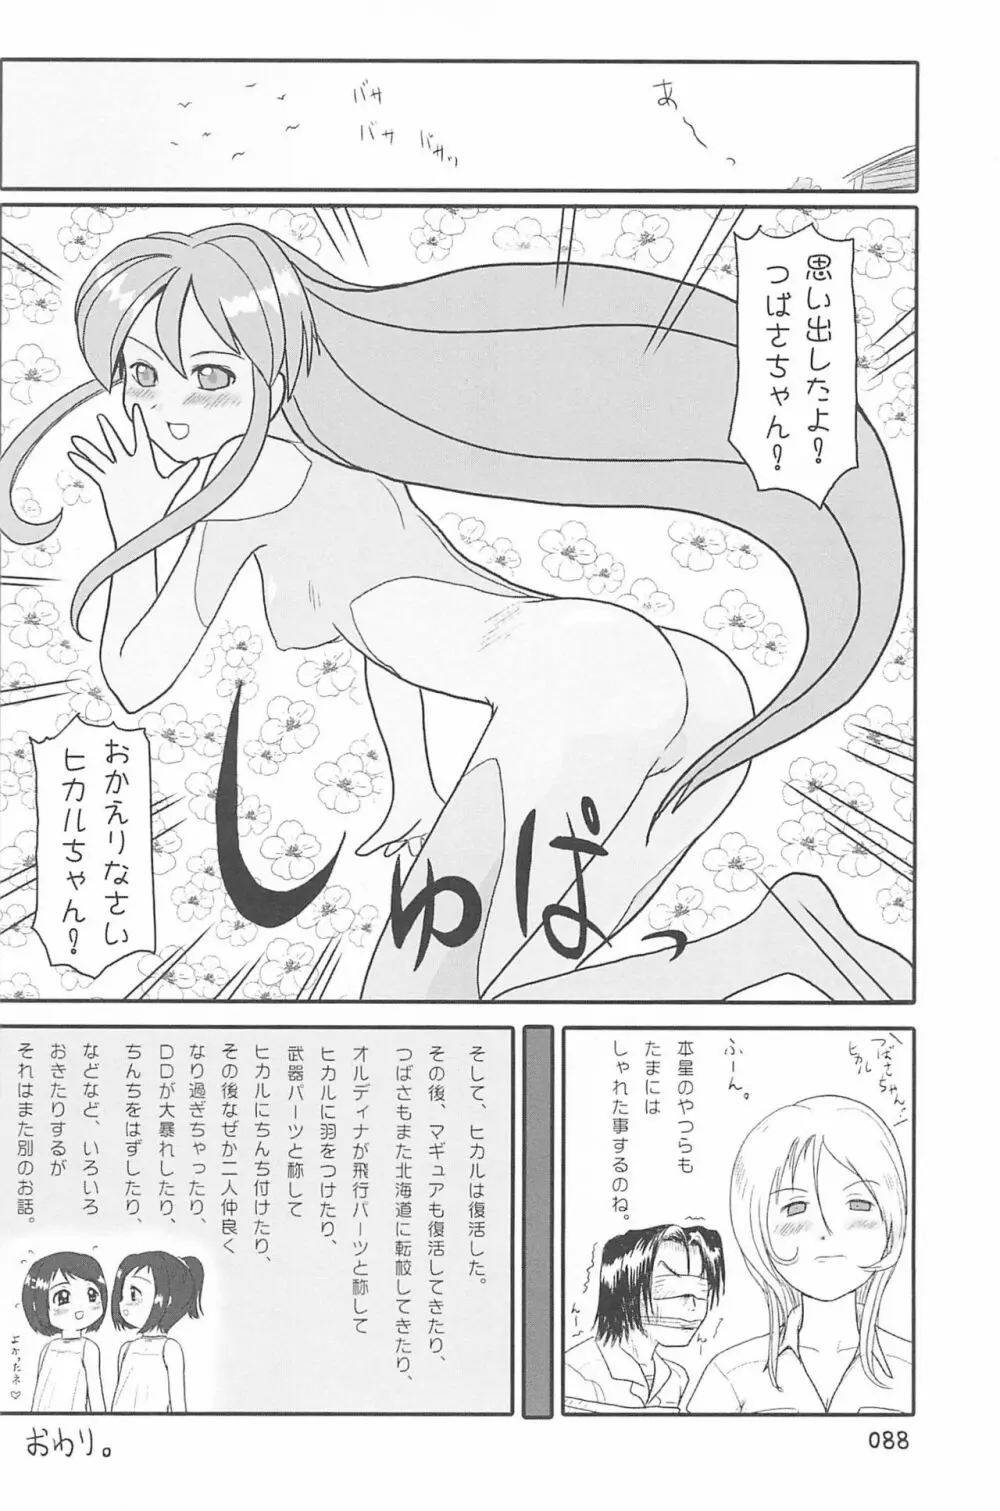 ND-special Volume 4 88ページ